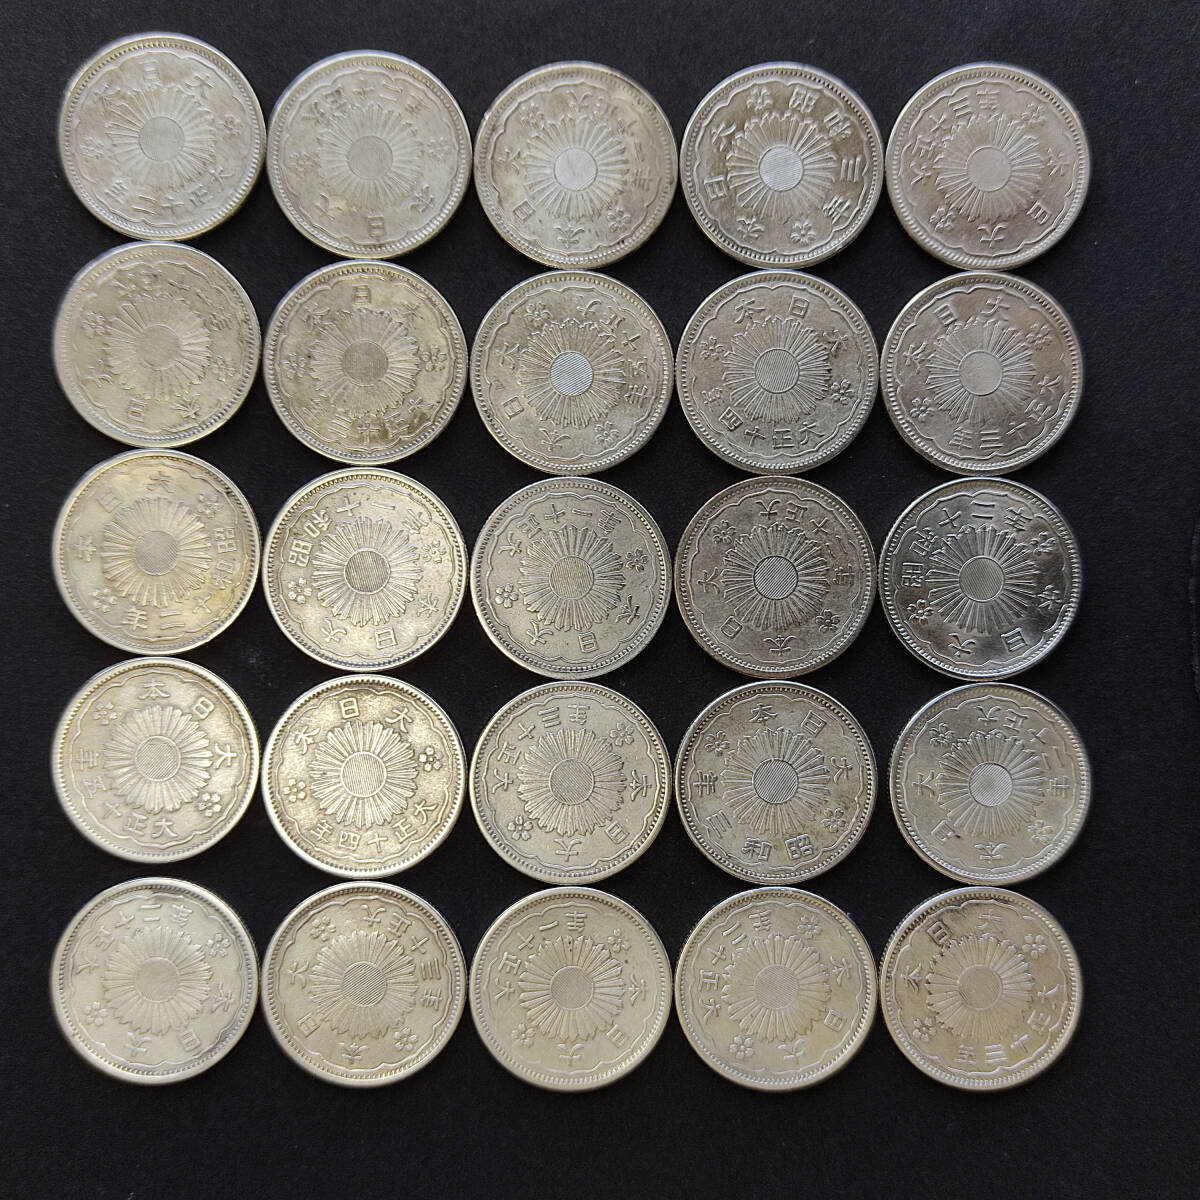  small size 50 sen silver coin beautiful goods 25 sheets 